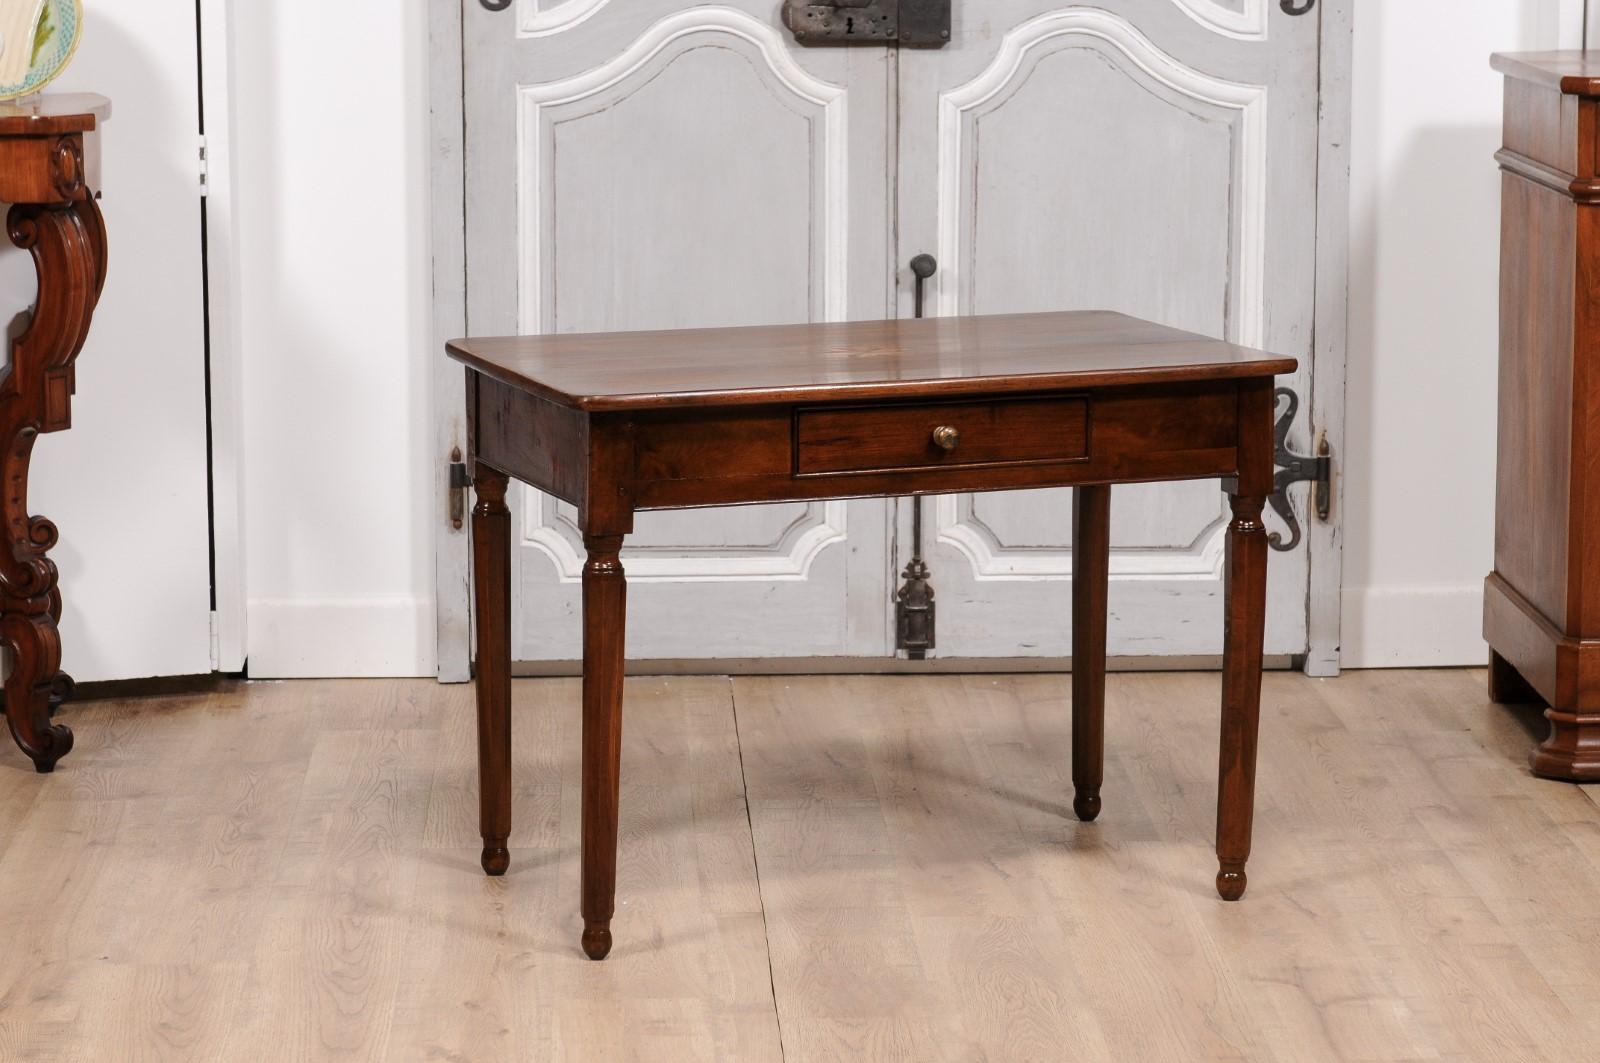 An Italian walnut side table from circa 1890 with elm star marquetry, single drawer and turned legs. This Italian walnut side table, hailing from the elegant period of circa 1890, boasts a splendid display of craftsmanship and design. The tabletop